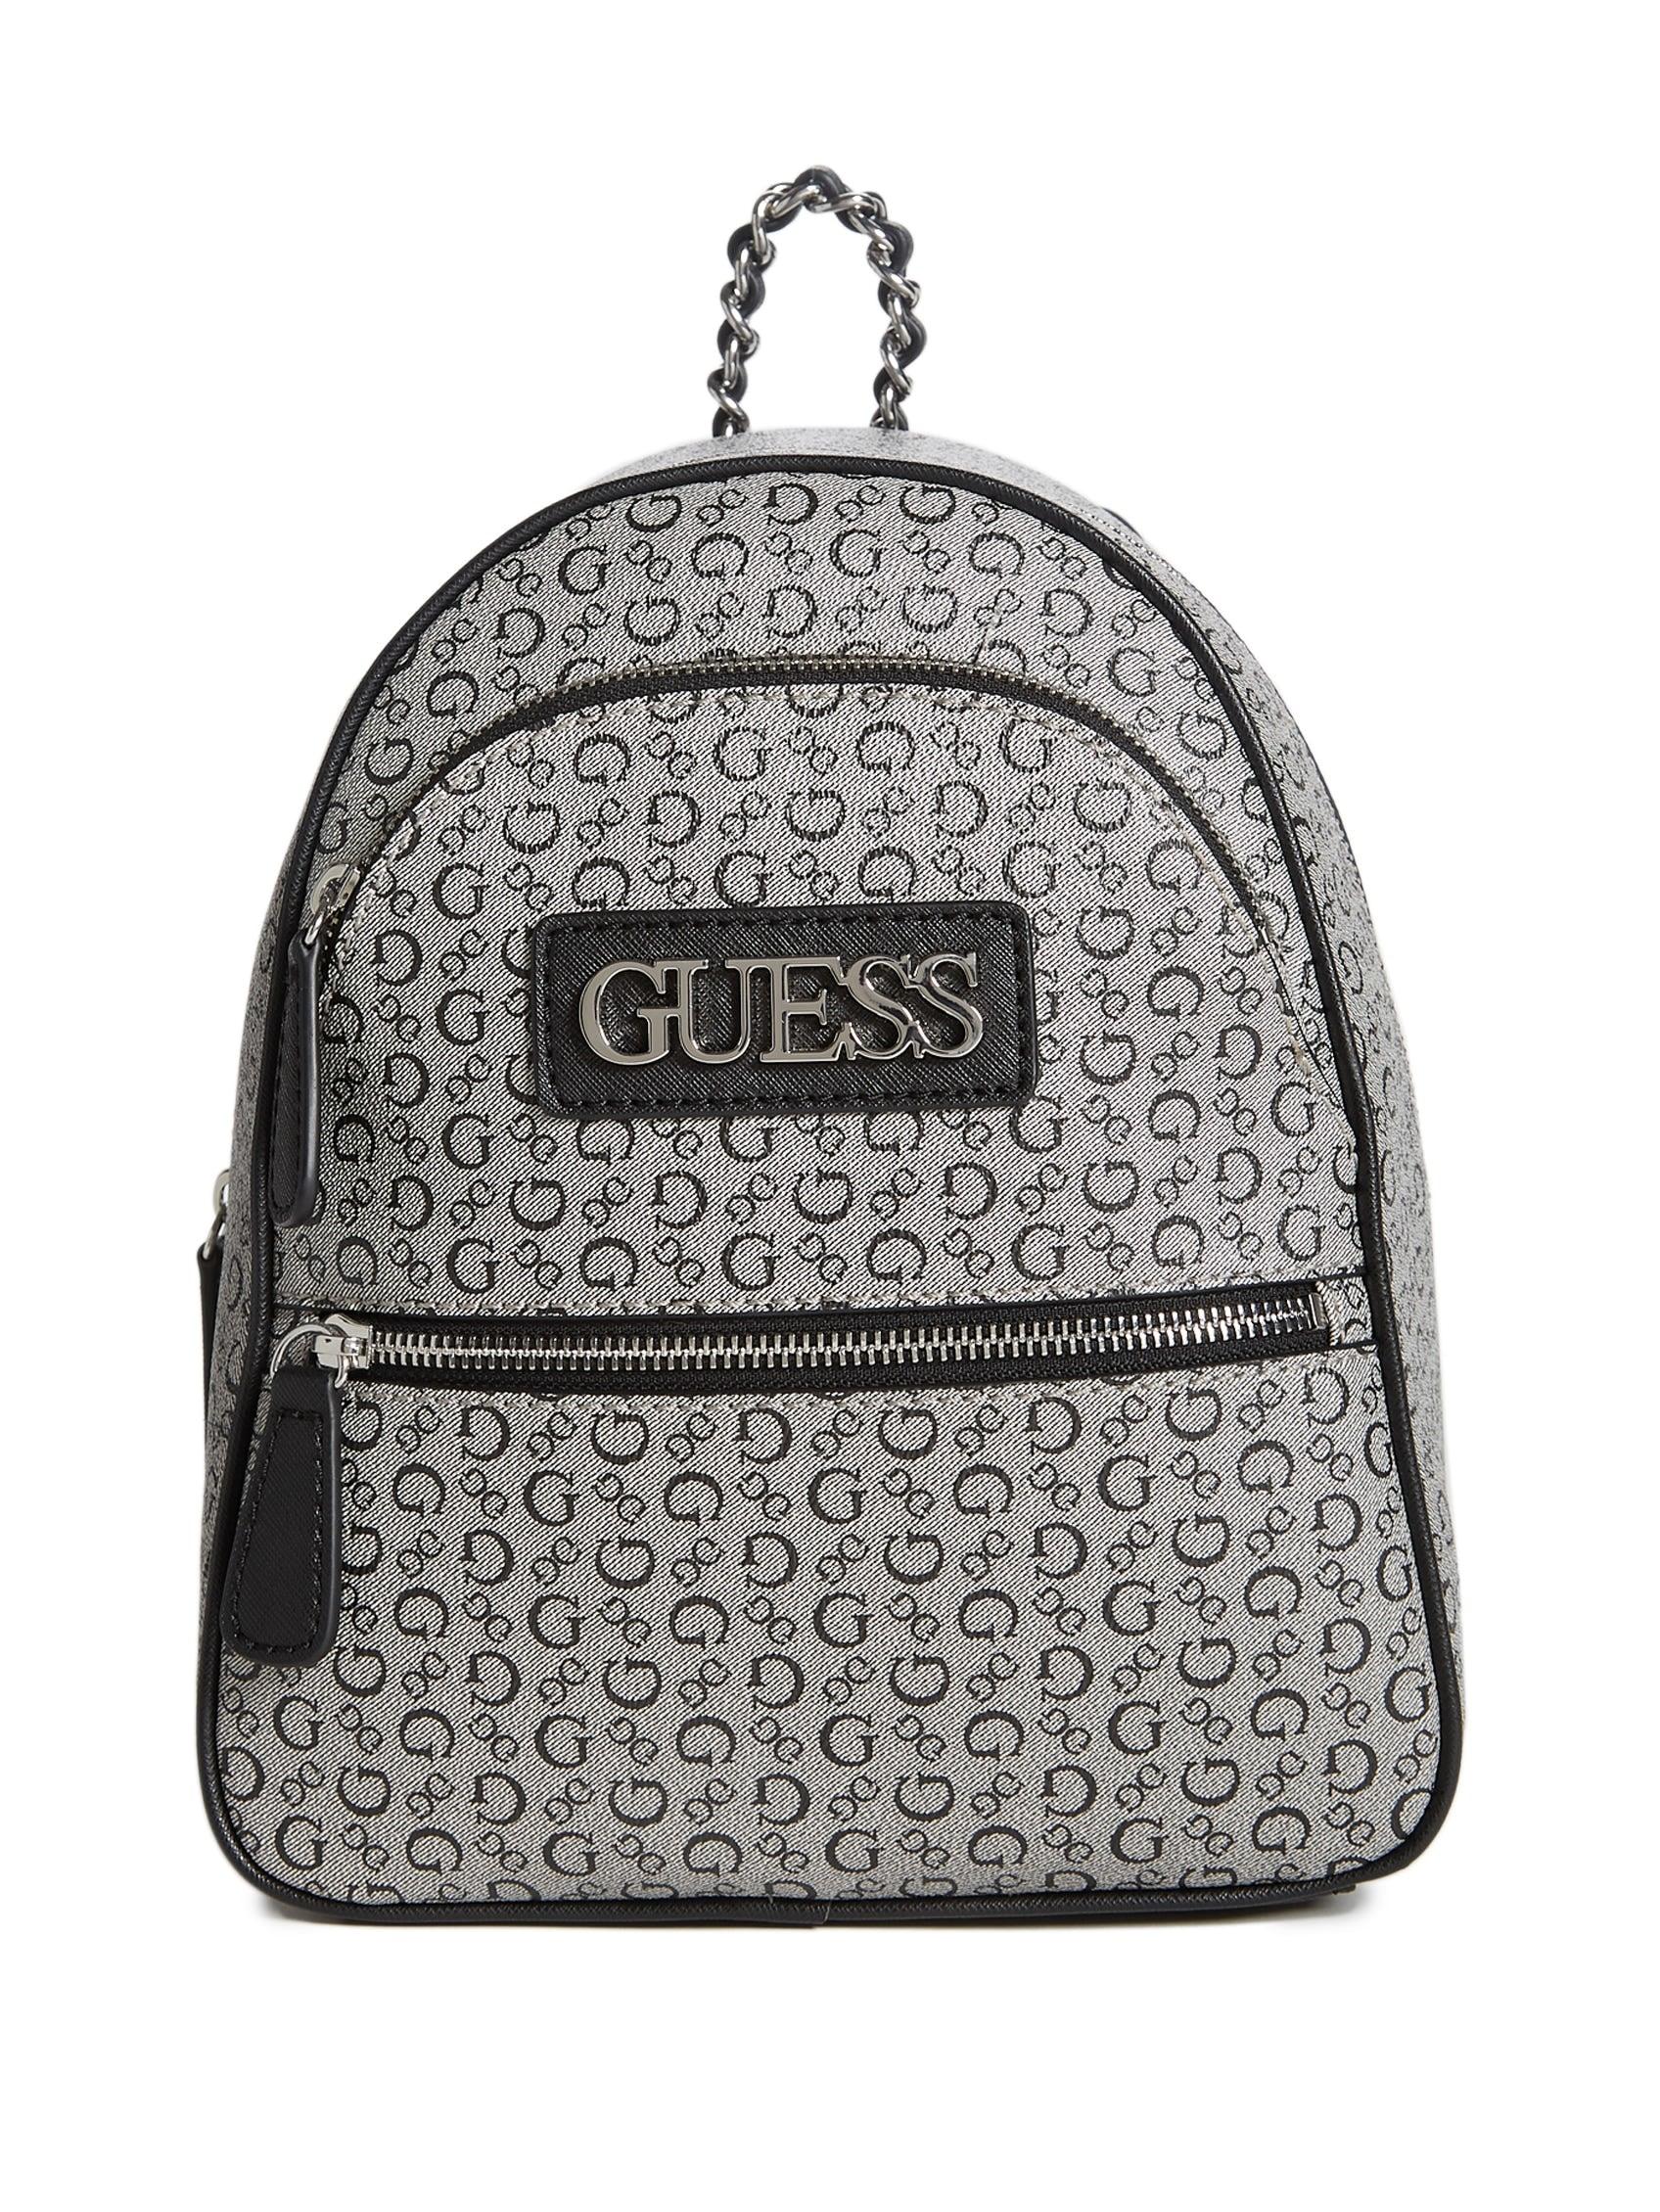 Guess Red Mini Backpack Women's Purse Pebbled Faux Leather Logo Zip